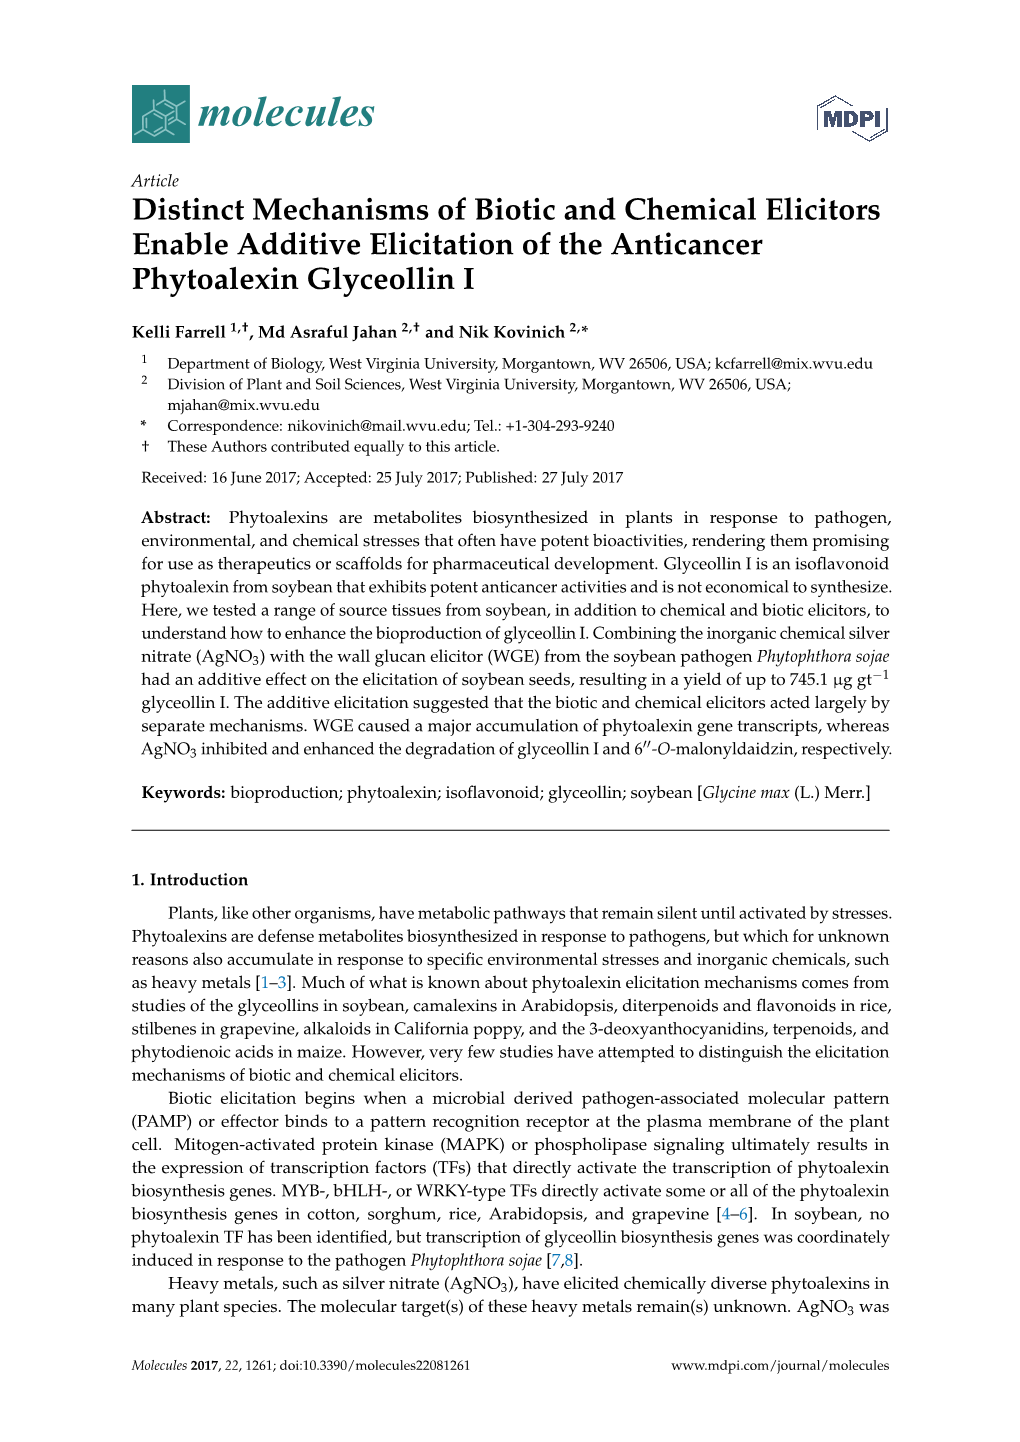 Distinct Mechanisms of Biotic and Chemical Elicitors Enable Additive Elicitation of the Anticancer Phytoalexin Glyceollin I